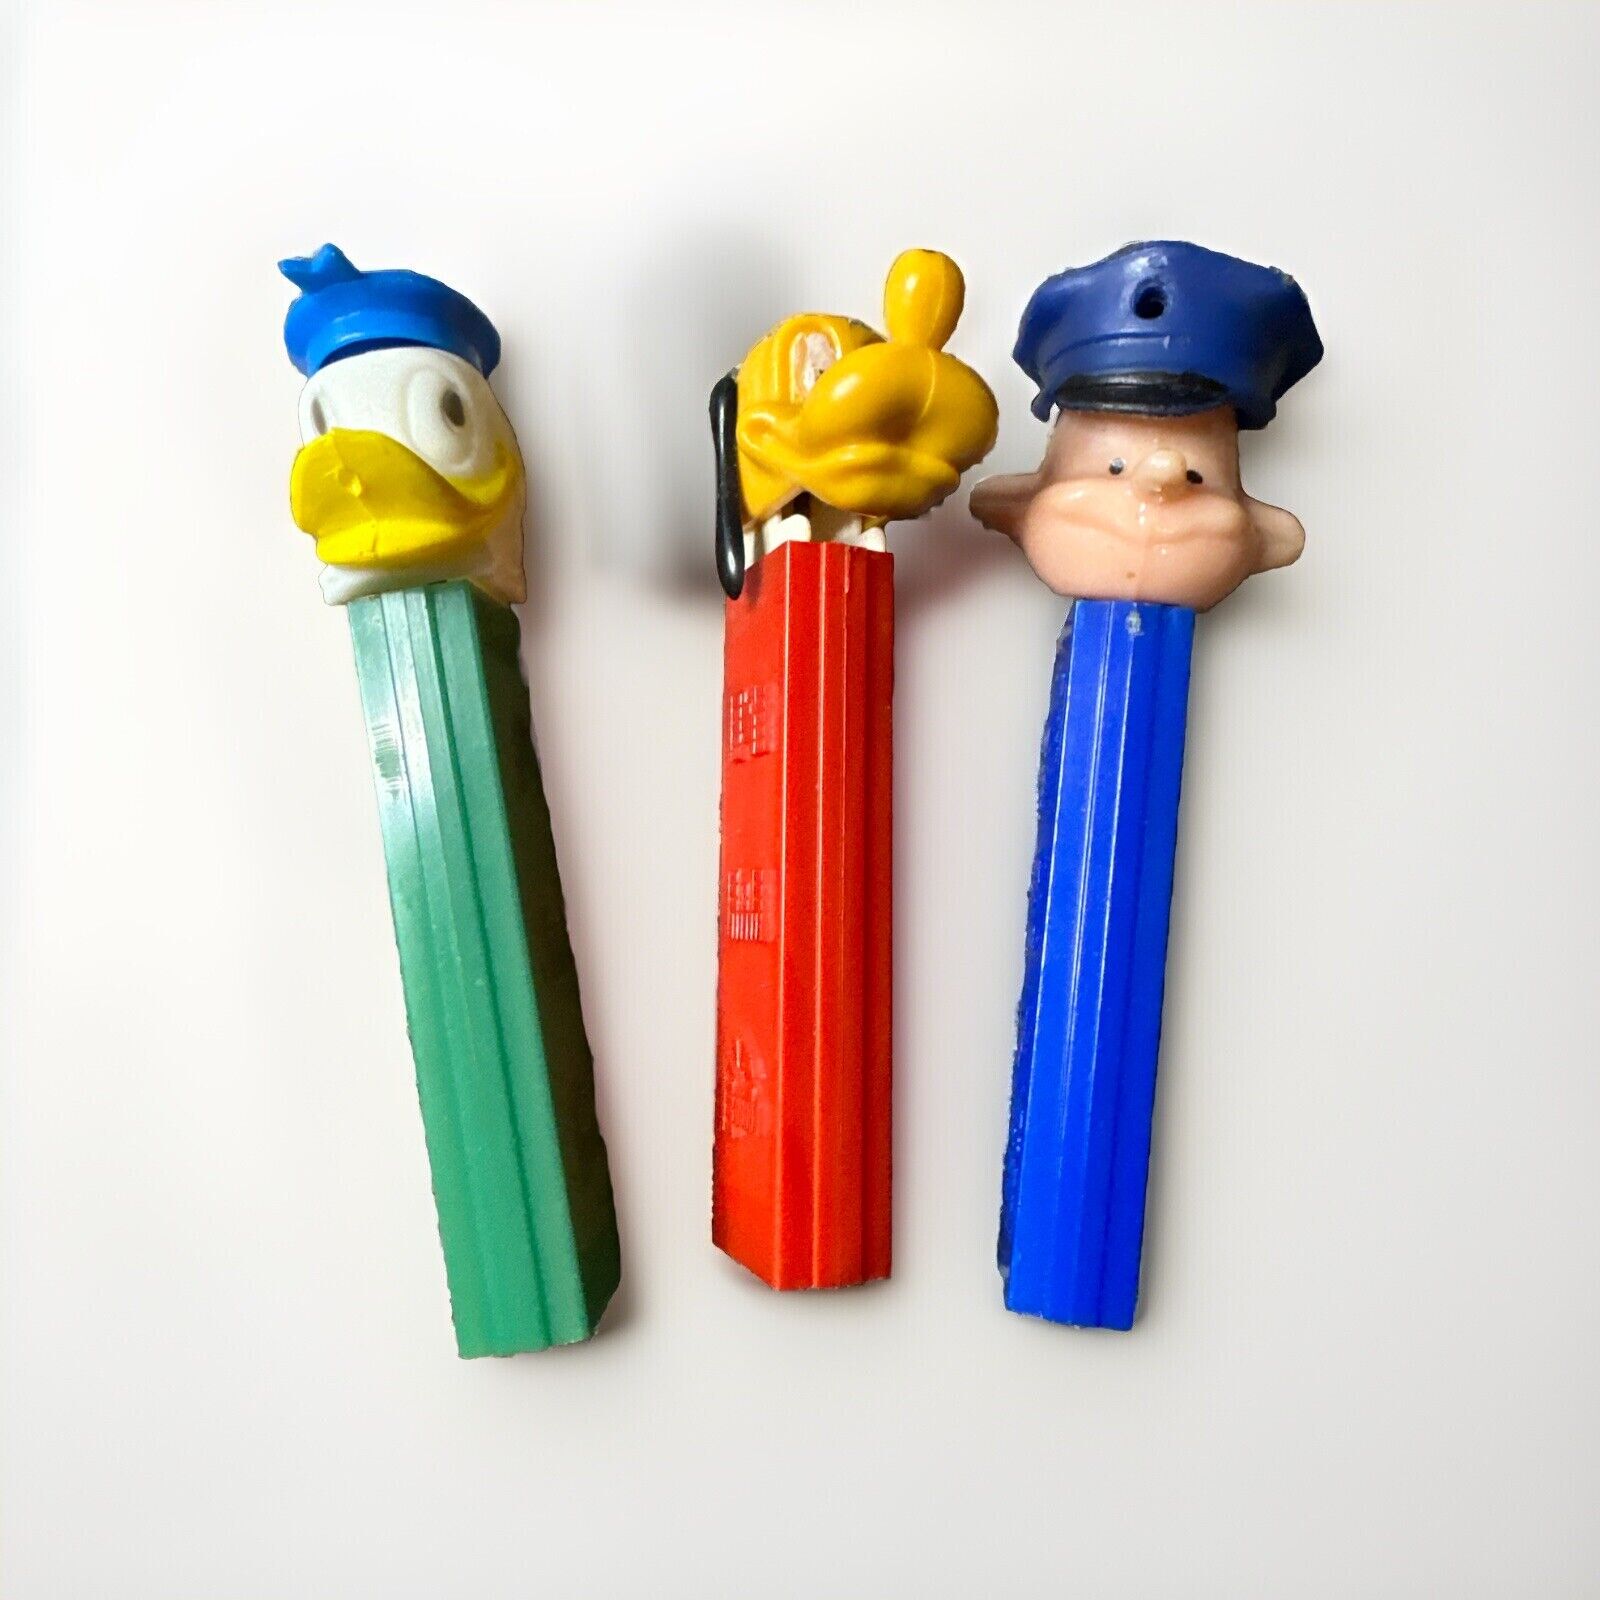 Vintage Pez No Feet Lot Donald Duck Police Officer Htf Pluto